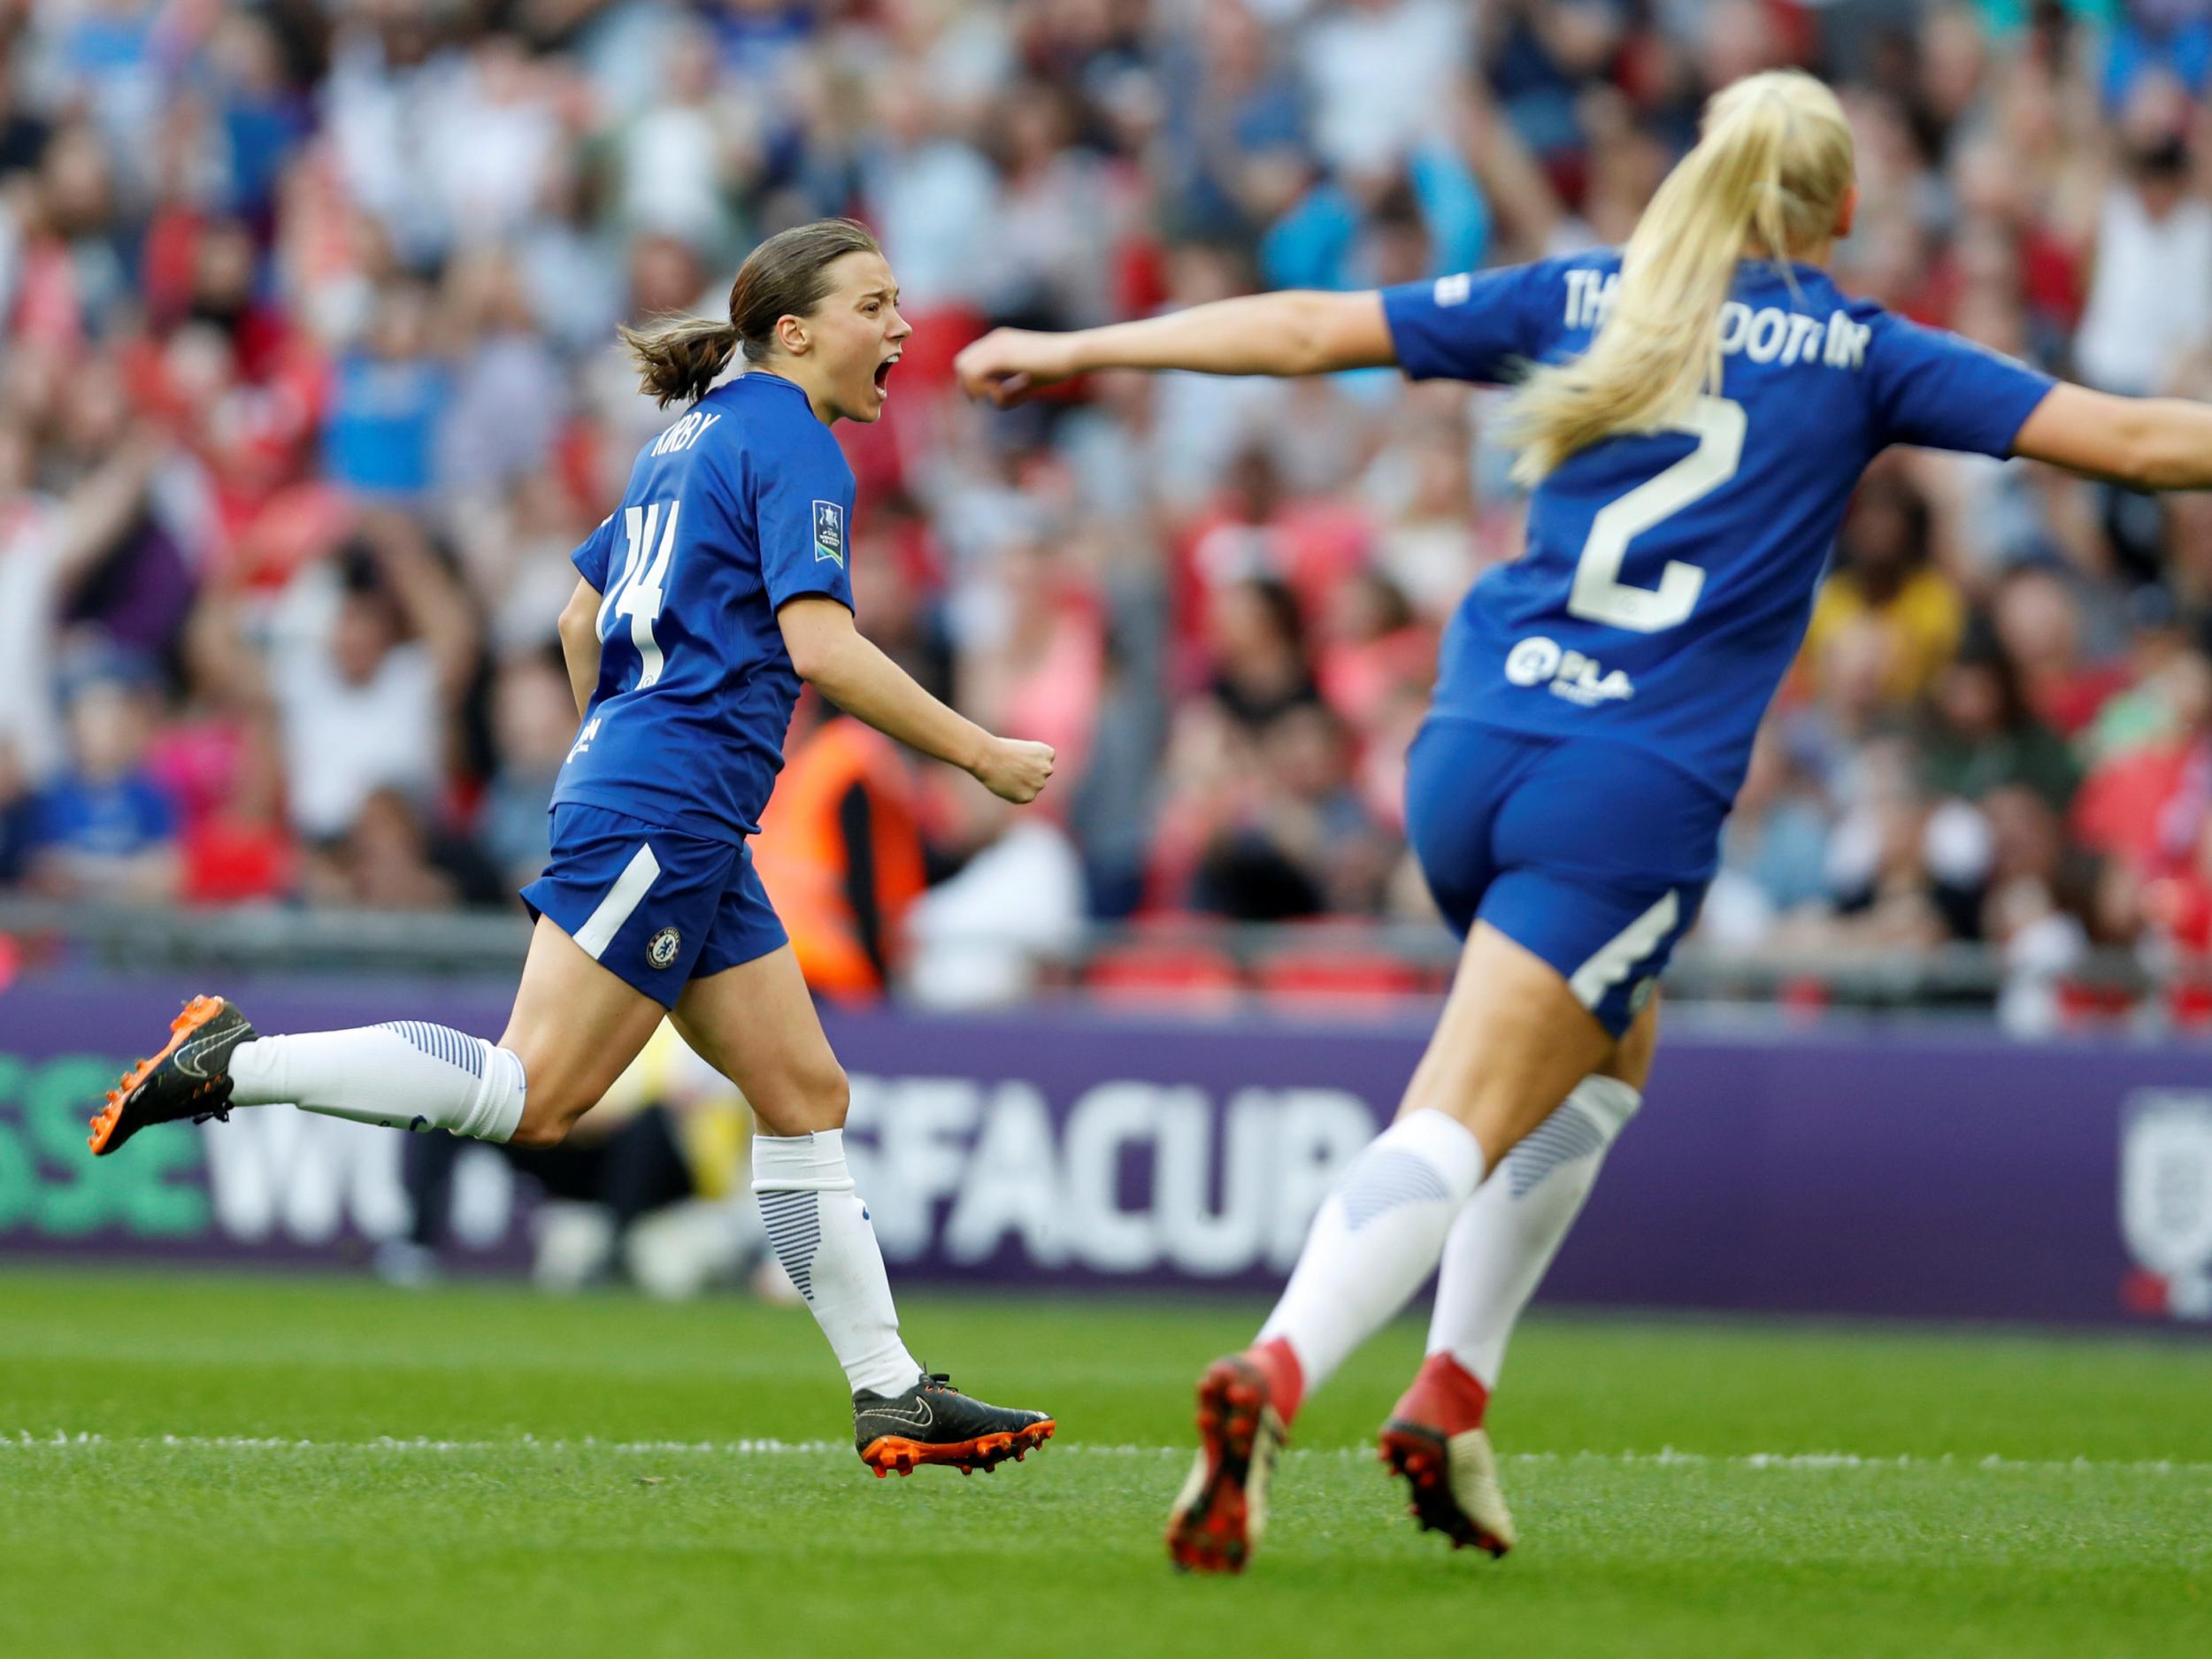 Fran Kirby stars as Chelsea Ladies win second Women's FA Cup over Arsenal